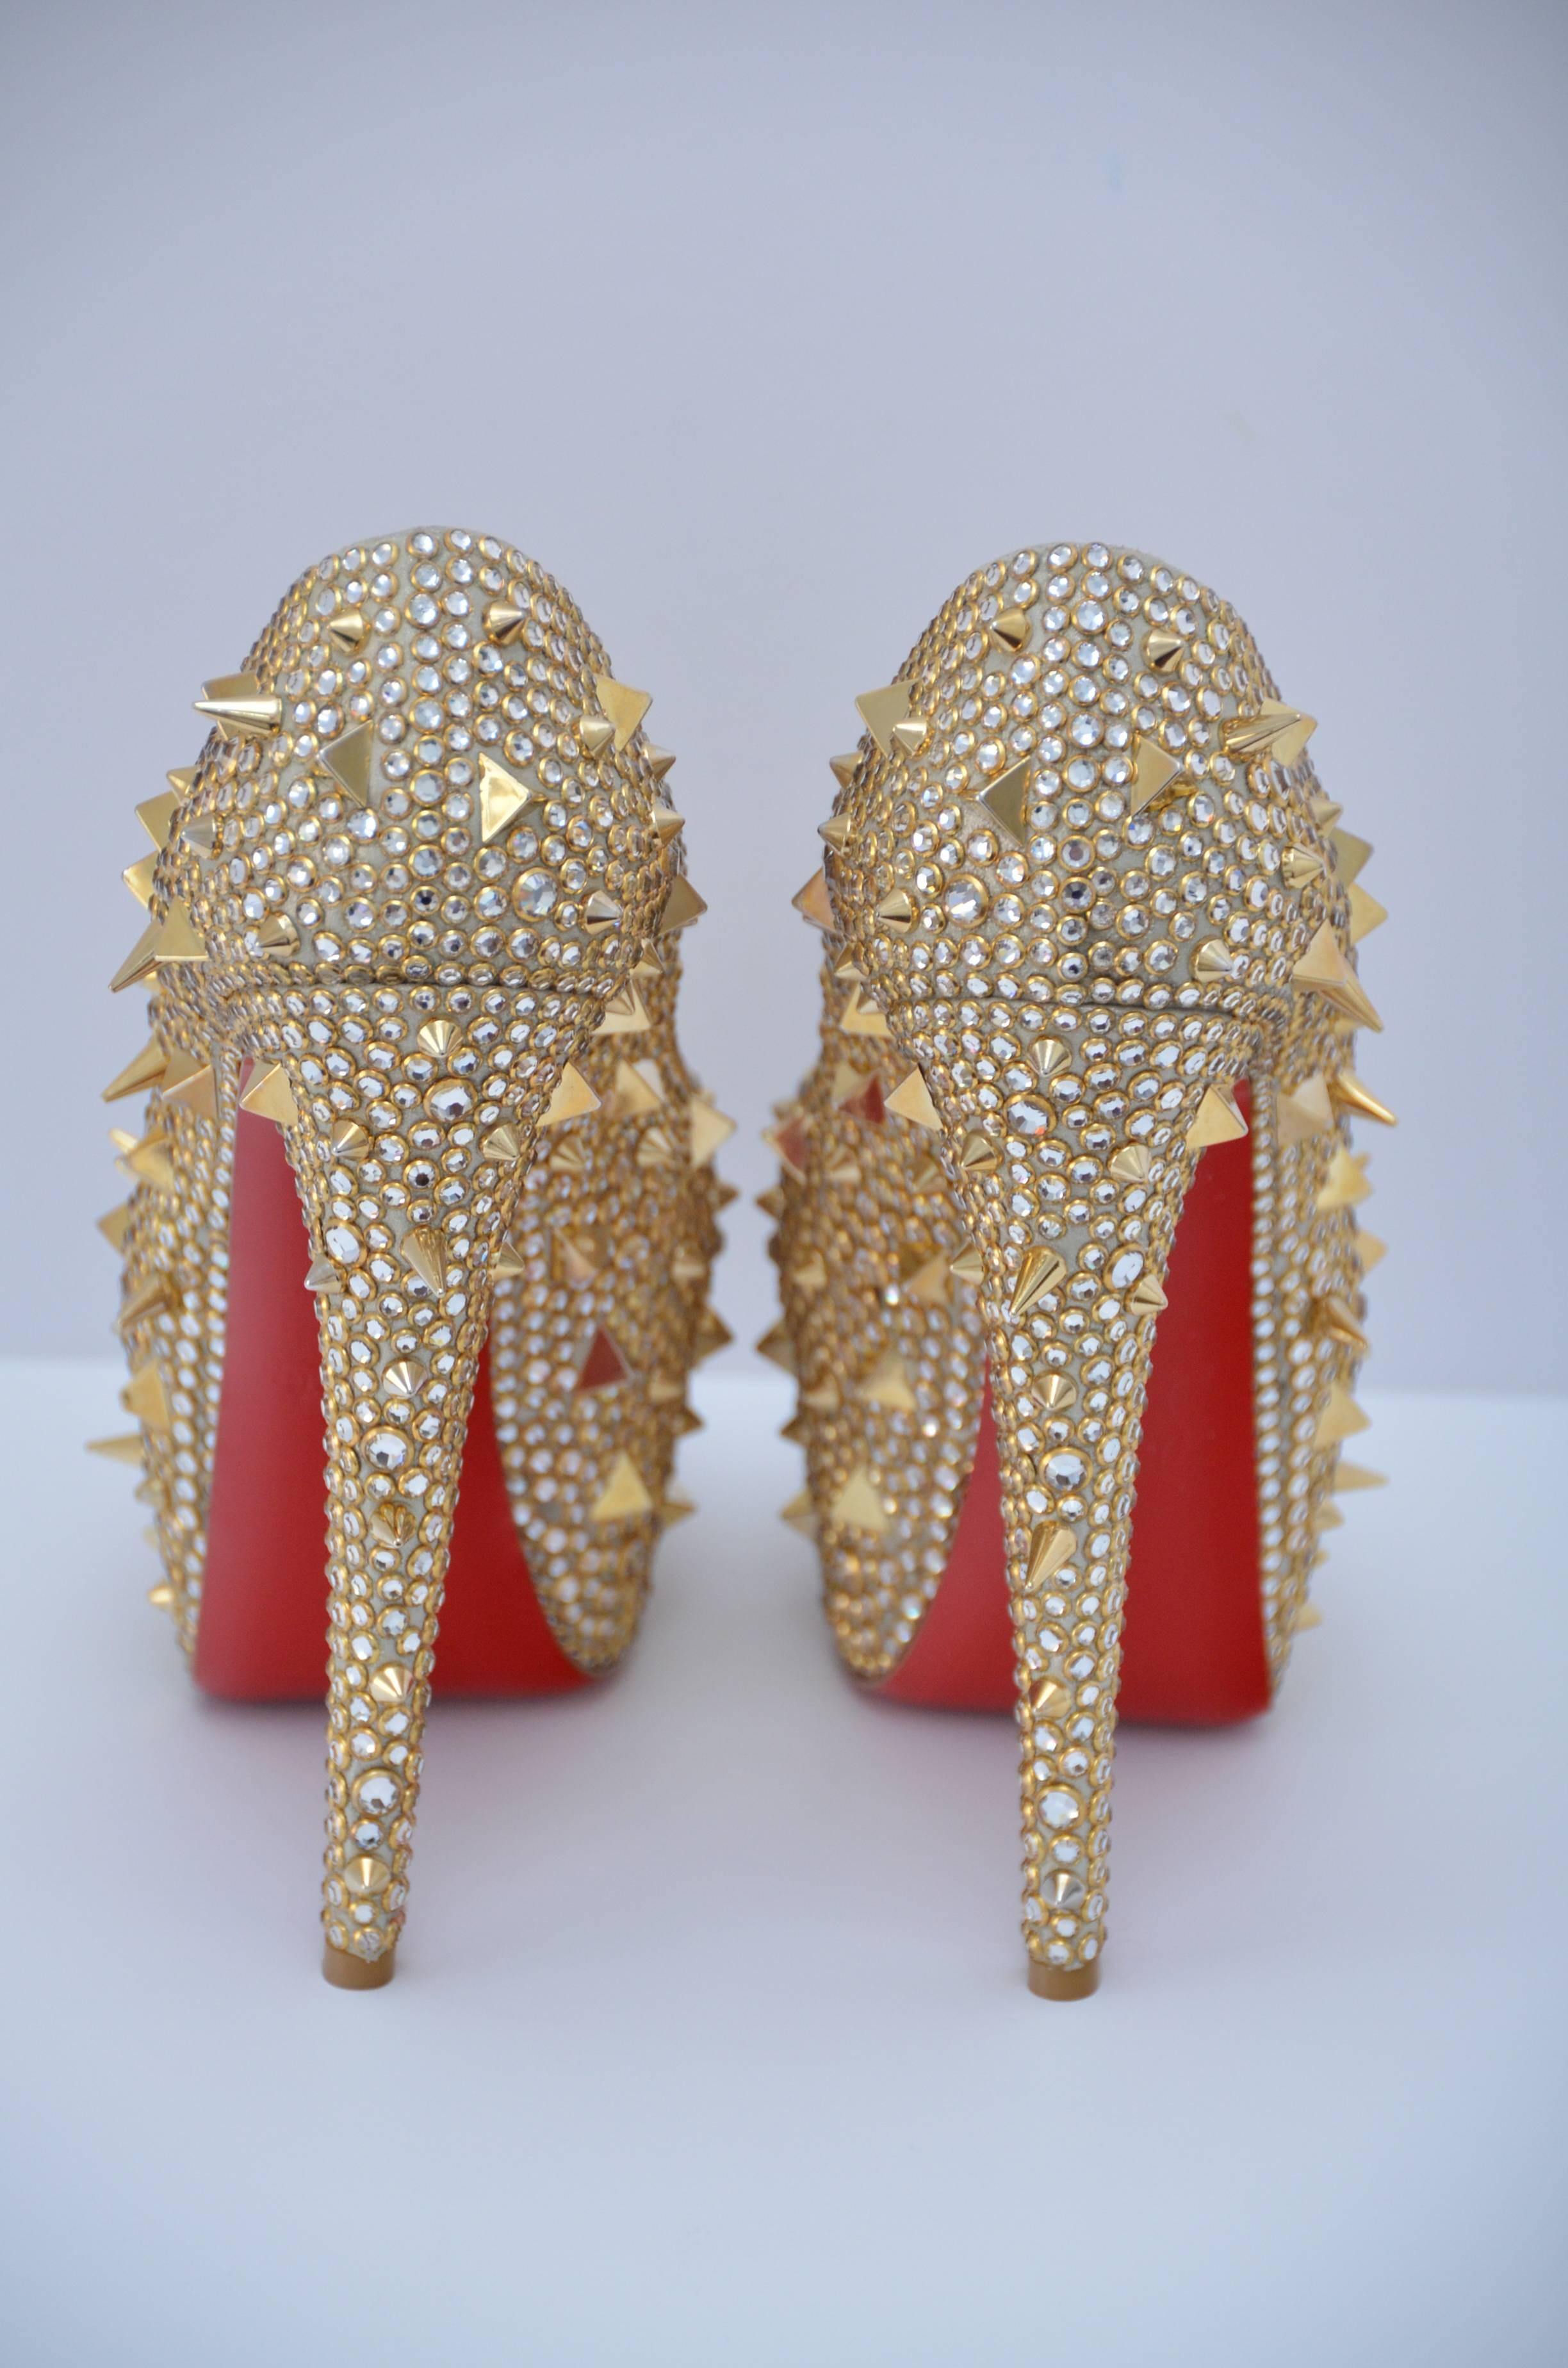 Brown From The KHLOE KARDASHIAN Closet Christian Louboutin Highness Strass Shoes 